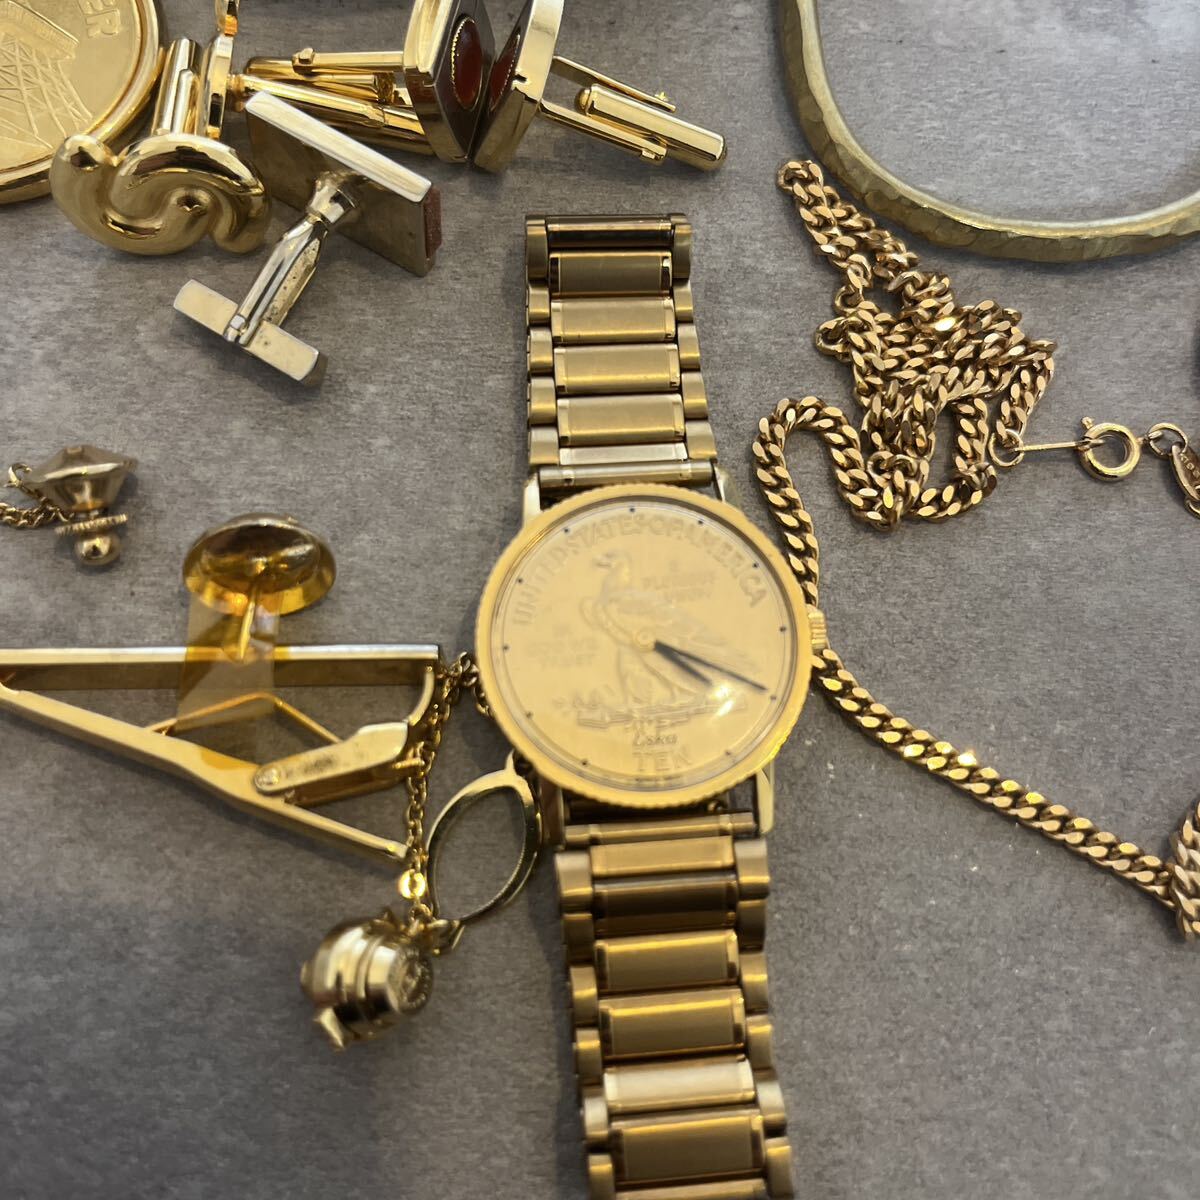  accessory set sale 18k stamp equipped EXPO 24k gf gp necklace cuffs clock gold genuineness unknown 